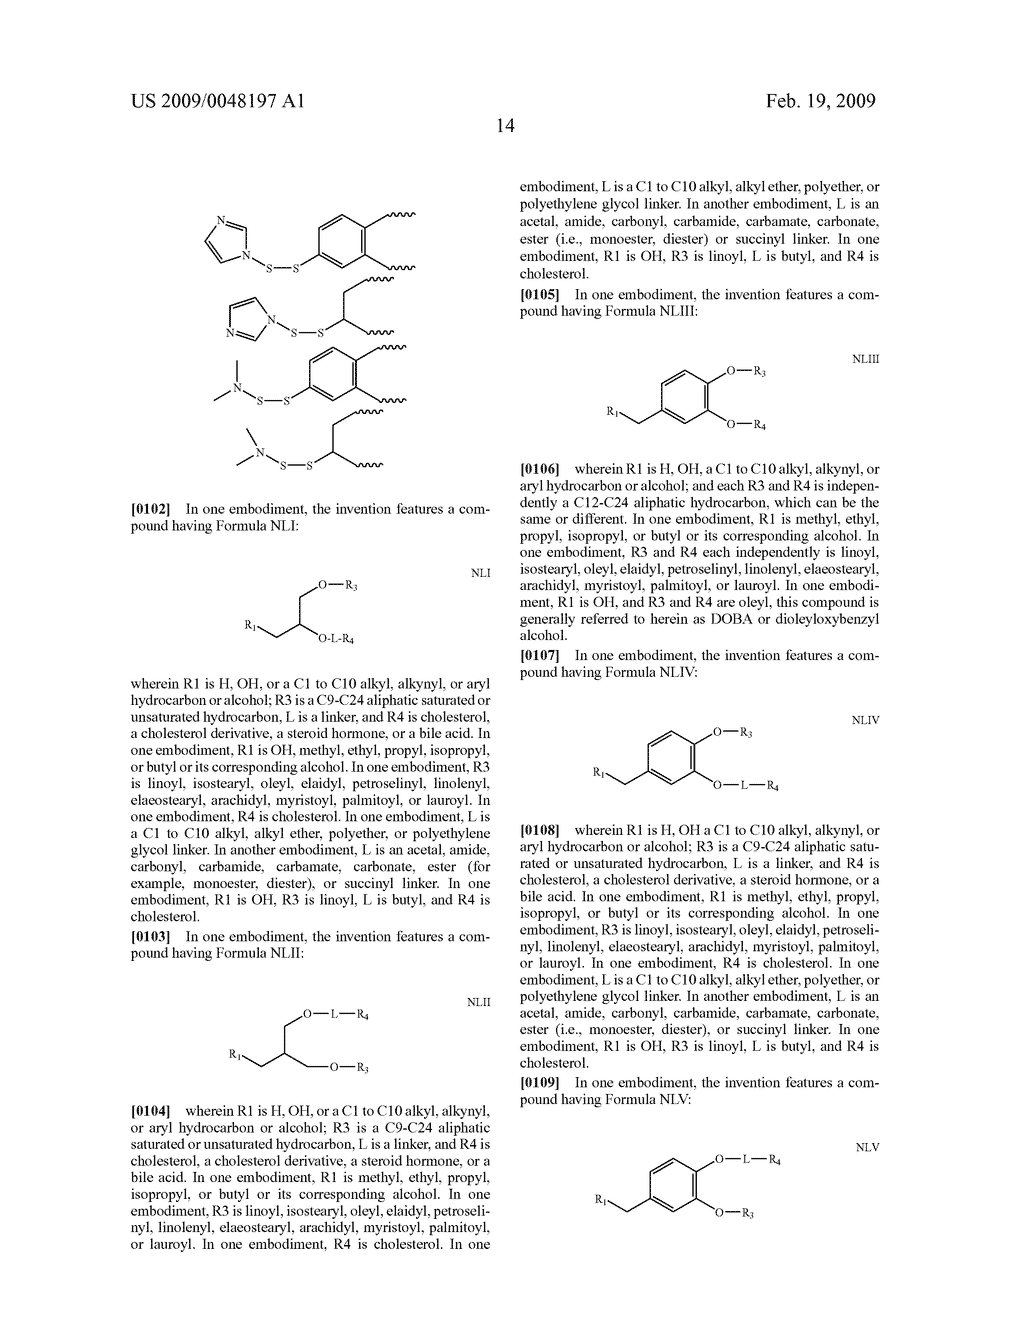 Lipid Nanoparticle Based Compositions and Methods for the Delivery of Biologically Active Molecules - diagram, schematic, and image 62